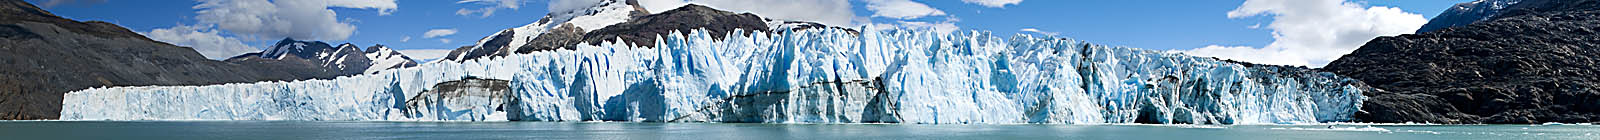 Panorama, stiched photography, of O'Higgins glacier, Chile - Banner